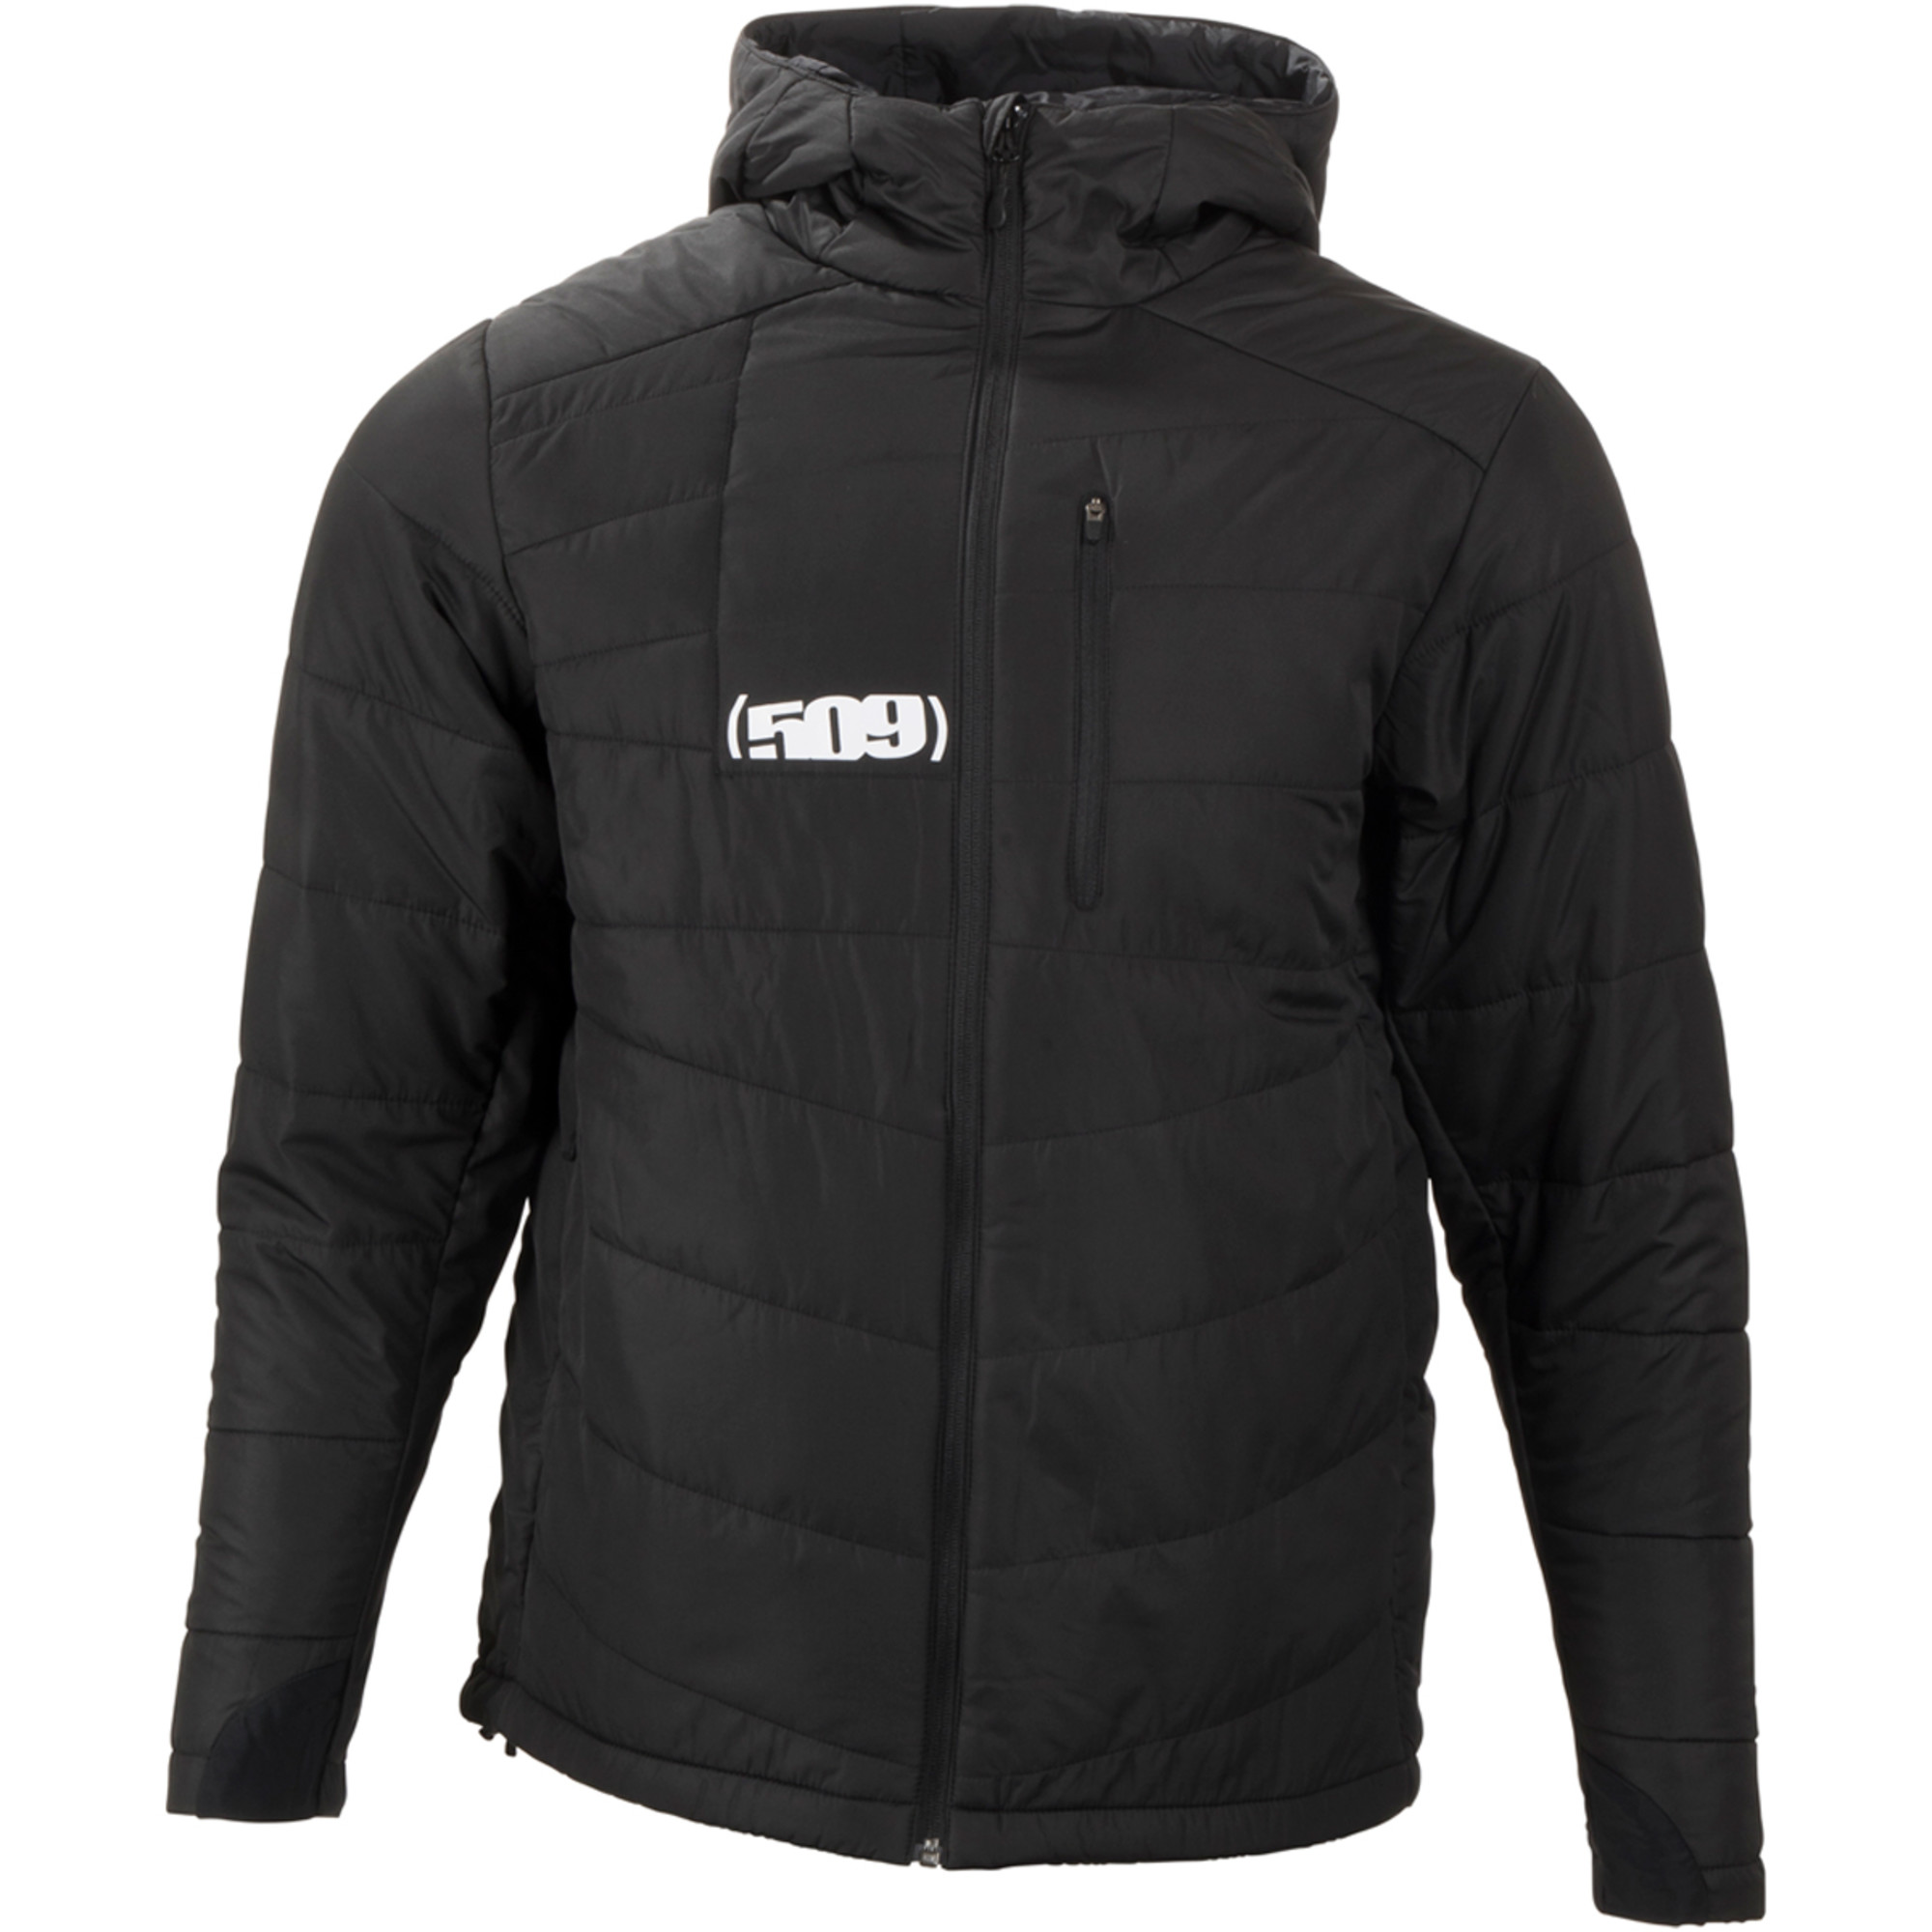 509 insulated jackets for men syn loft hooded